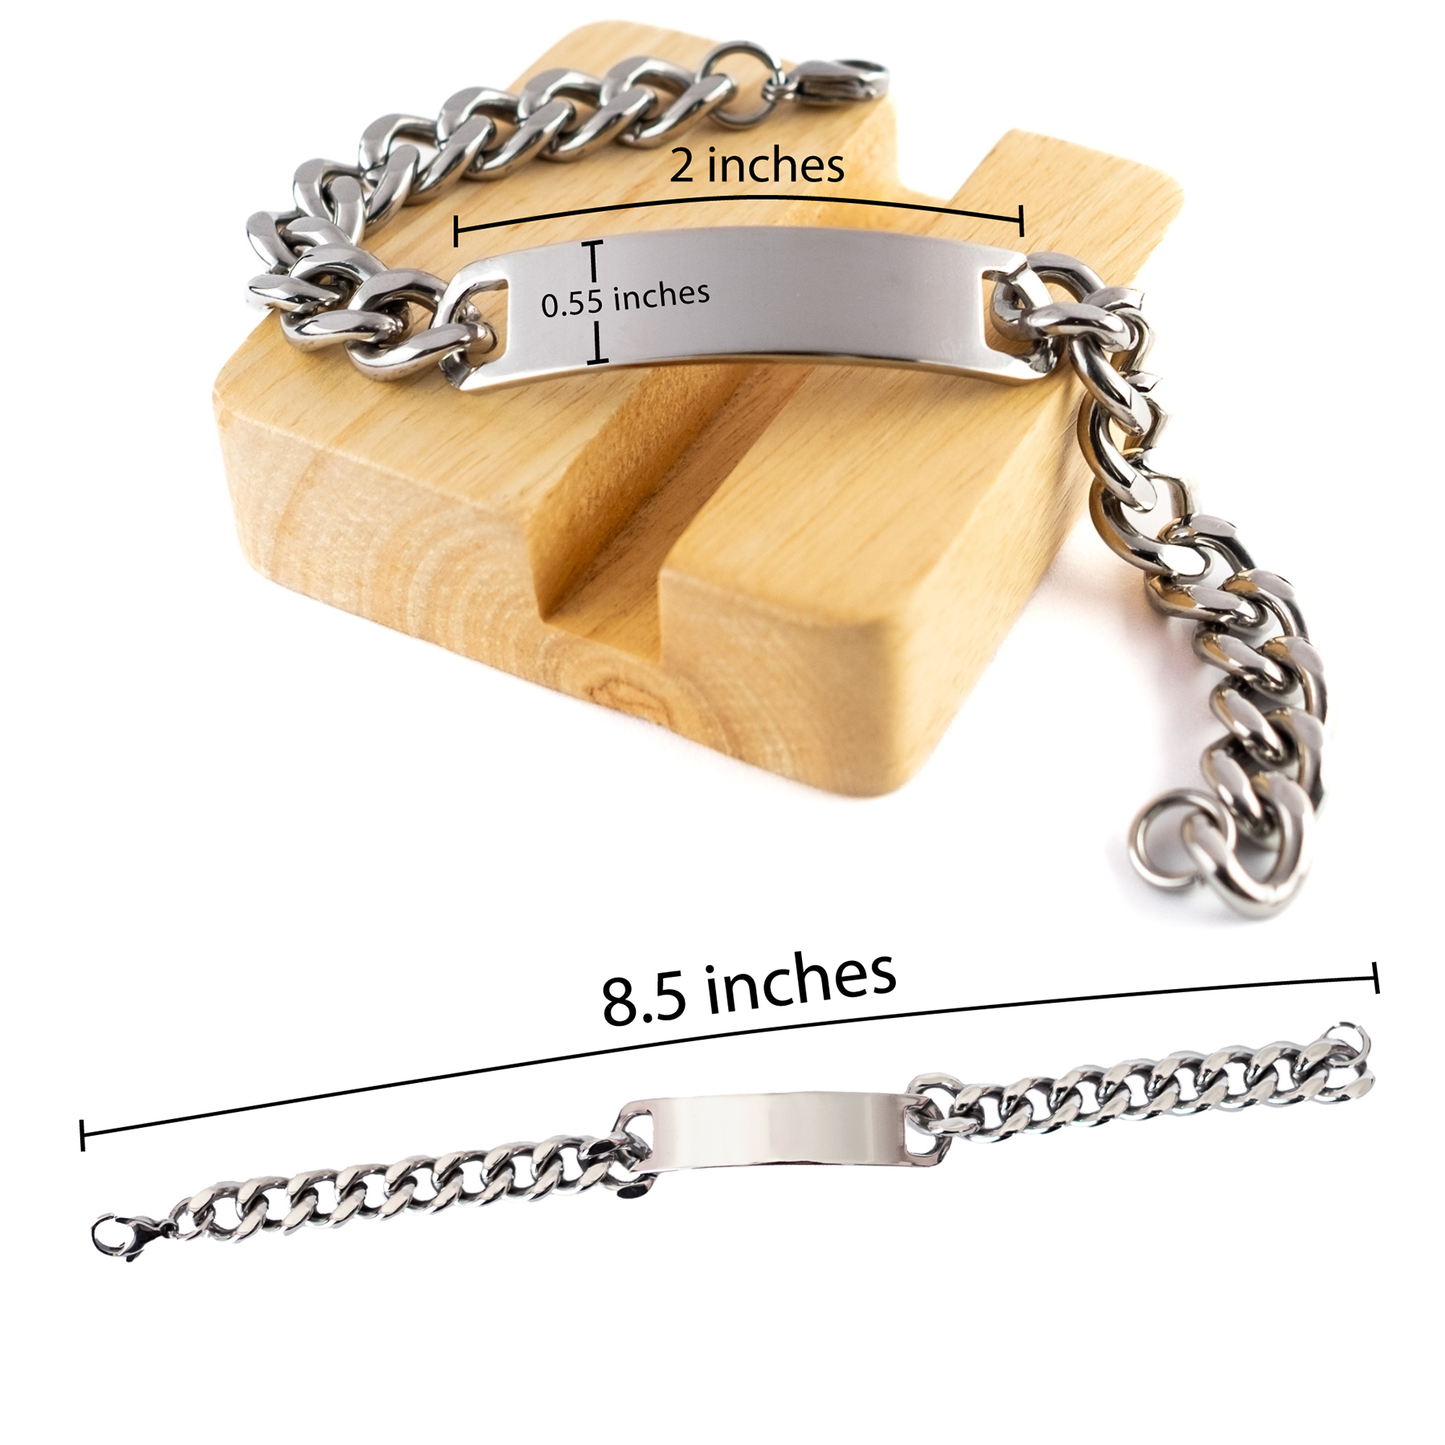 Stainless Steel Grandpop Bracelet - Youll Always have a Place in my Heart Confidence, Graduation, Hope, Veterans Day Gift for Him